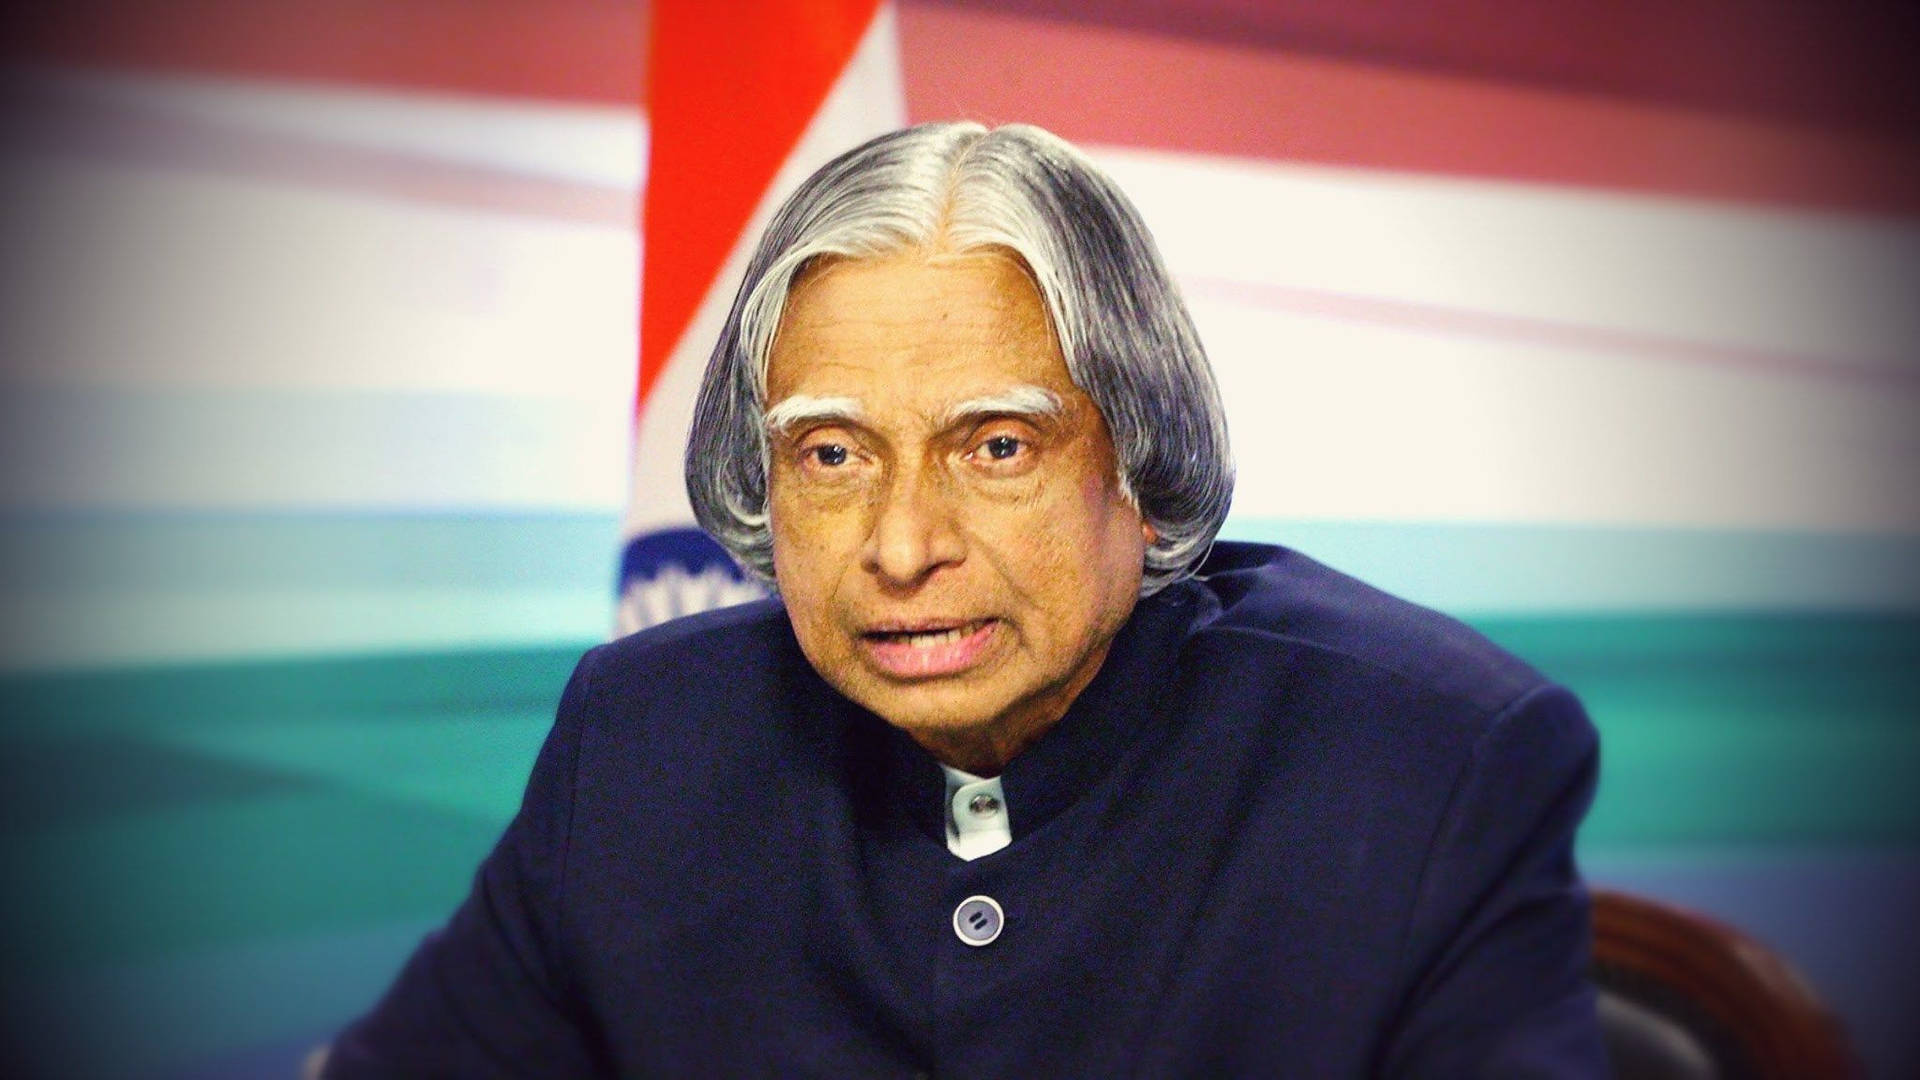 Honorable 11th President Of India, Dr. A.p.j Abdul Kalam In High Definition Background